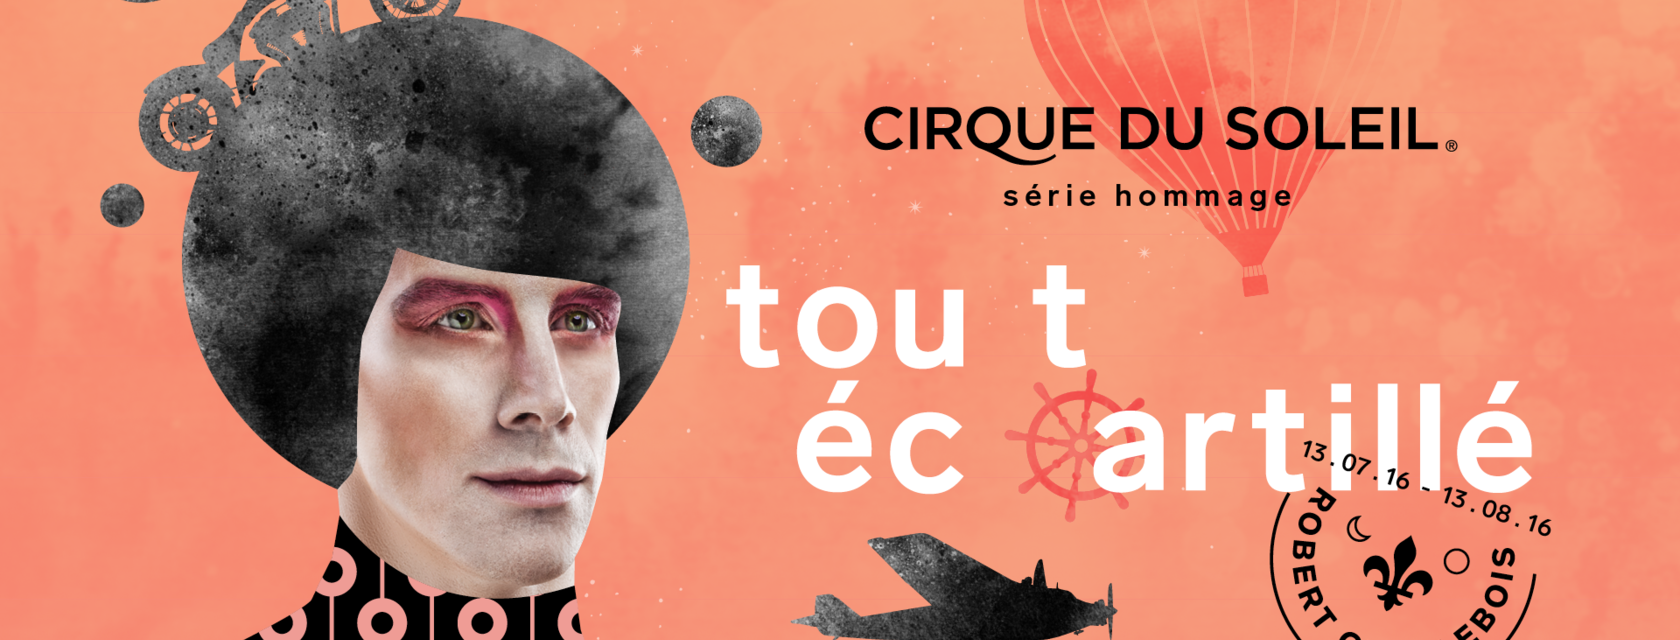 "Tout écartillé" will be the title of the second show of the Tribute Series by Cirque du Soleil